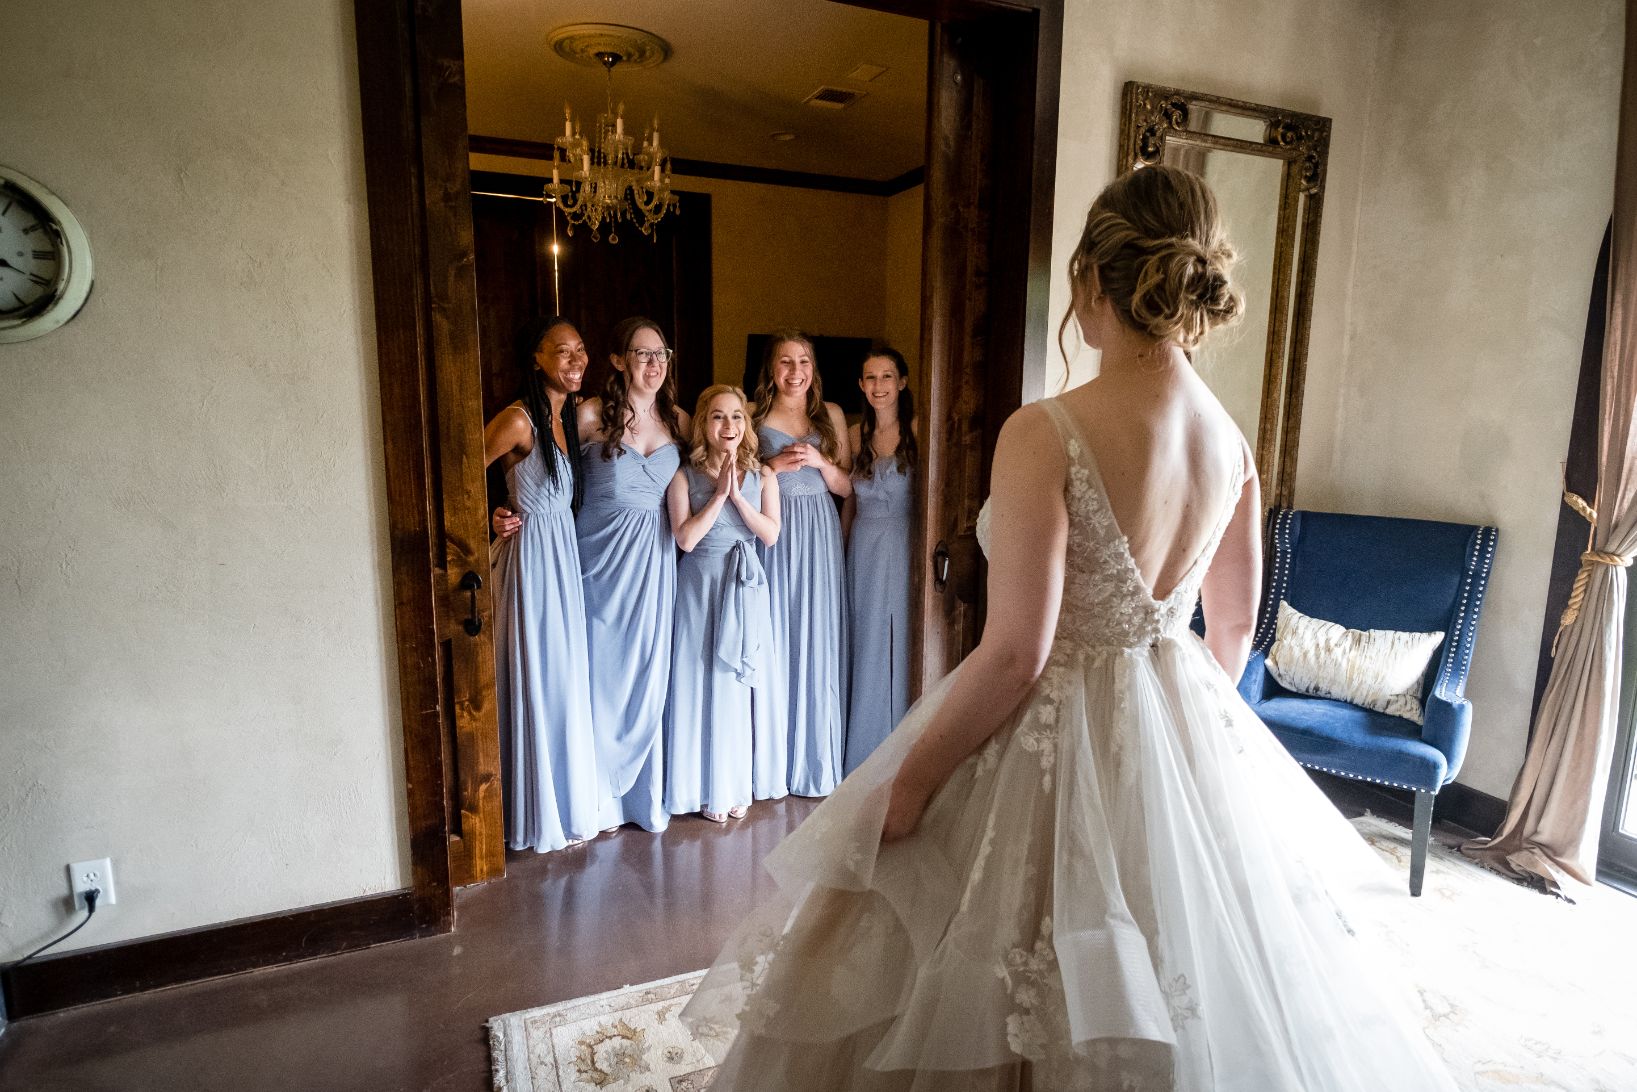 Five bridesmaids in blue long dresses stand in door-away with excitement and joy to see the bride for the first time. 